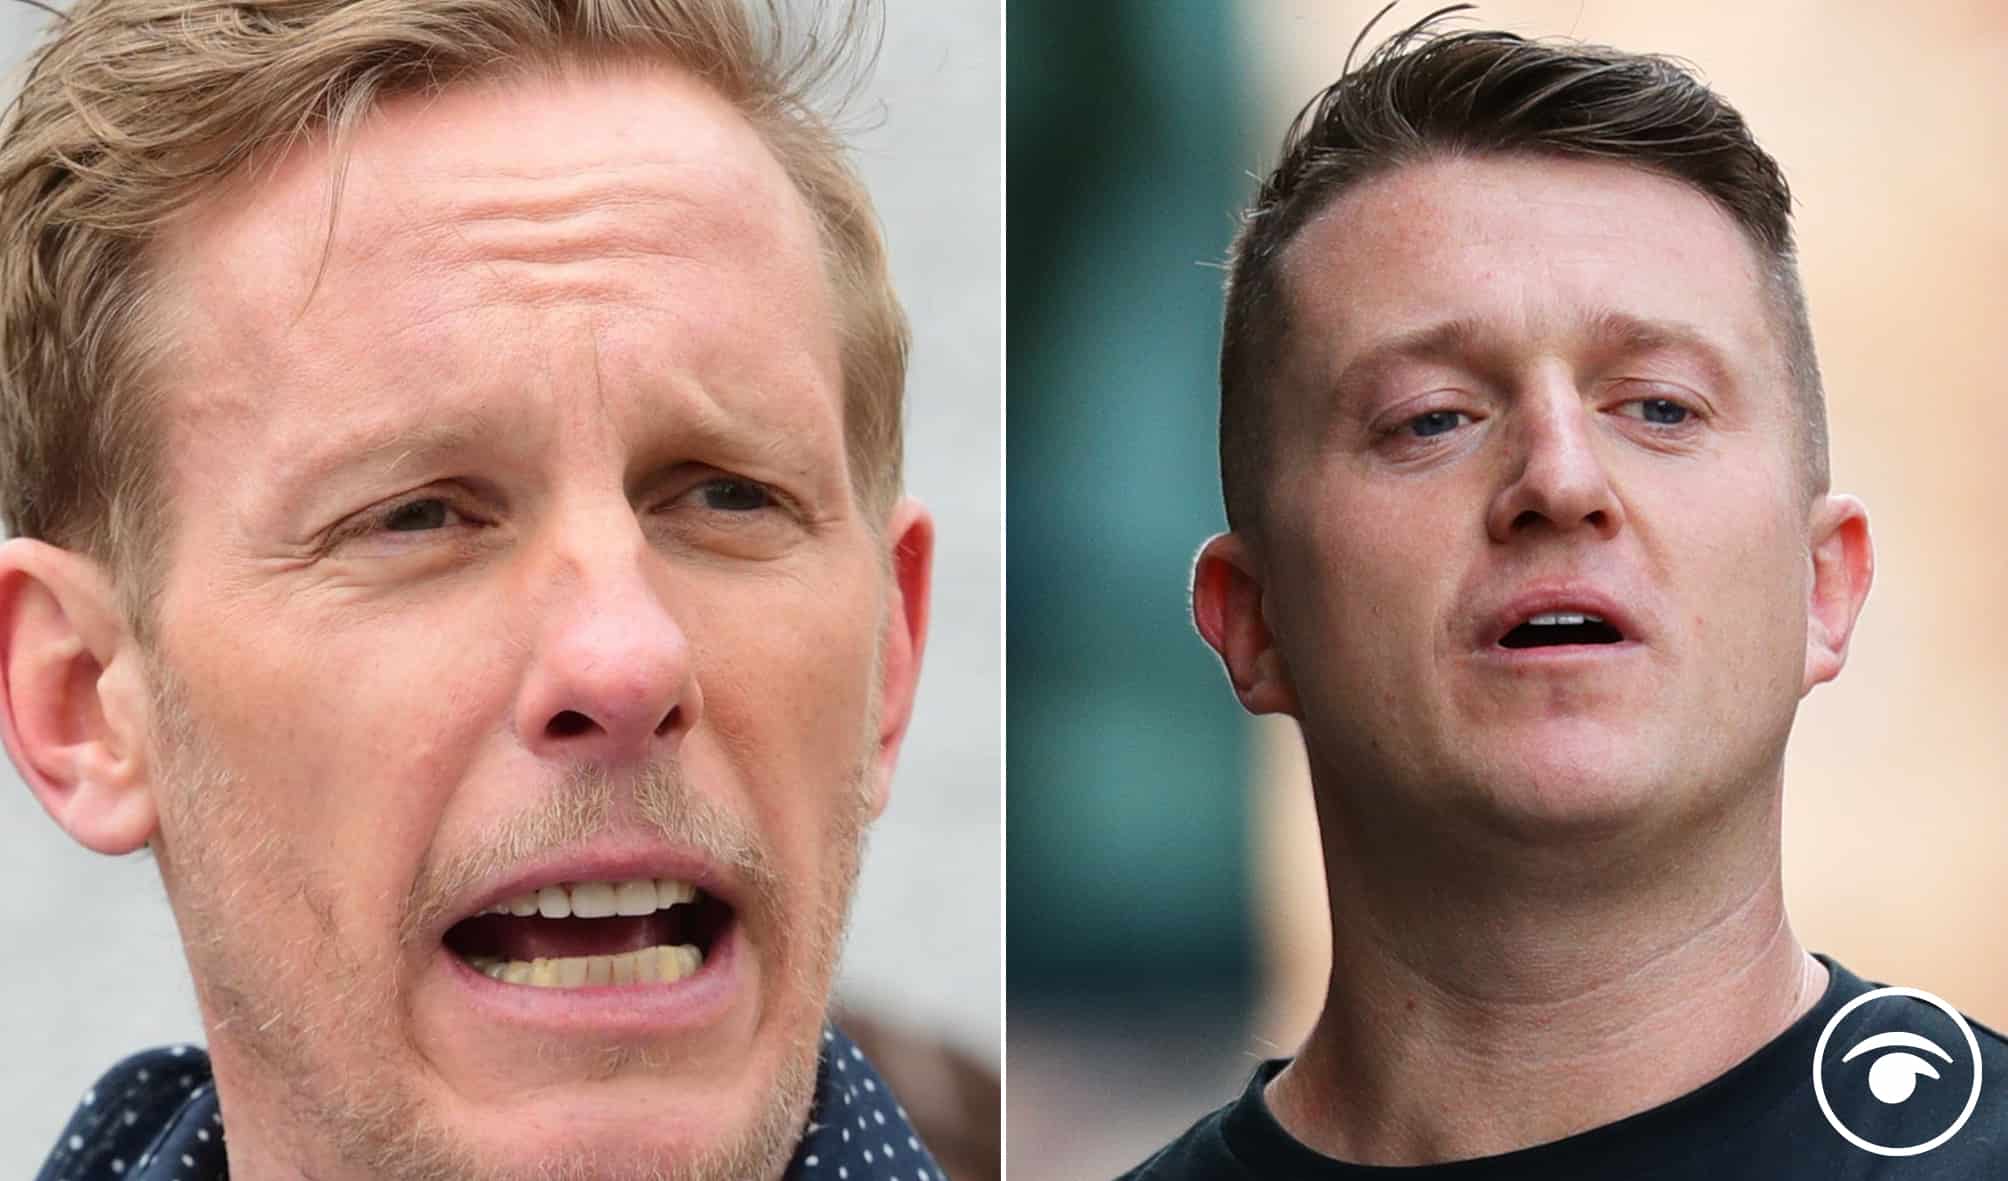 Laurence Fox: Reactions to nickname comparing him to a posh Tommy Robinson